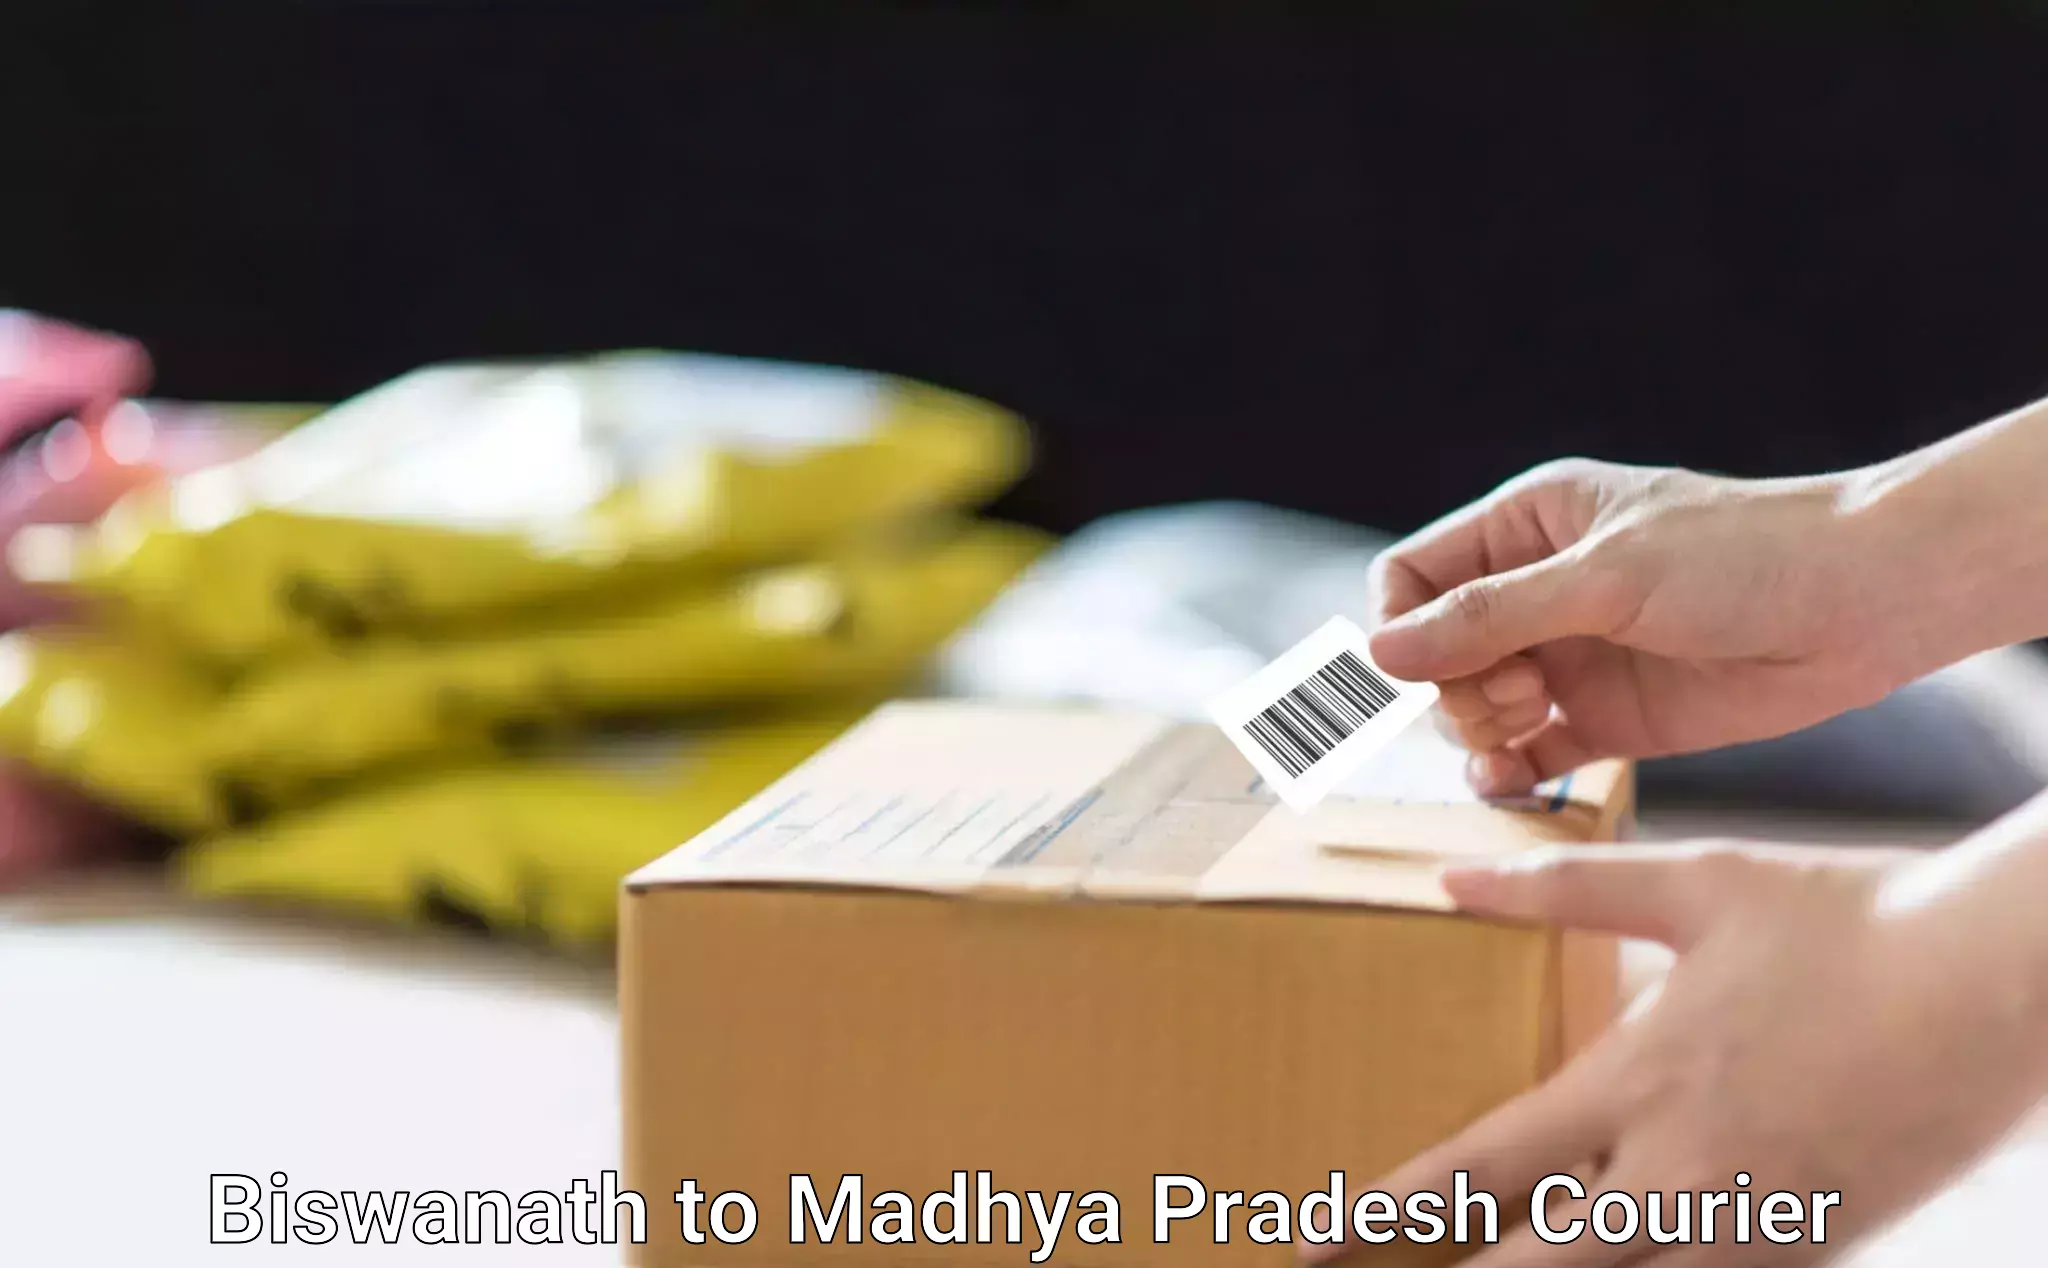 State-of-the-art courier technology Biswanath to Madhya Pradesh